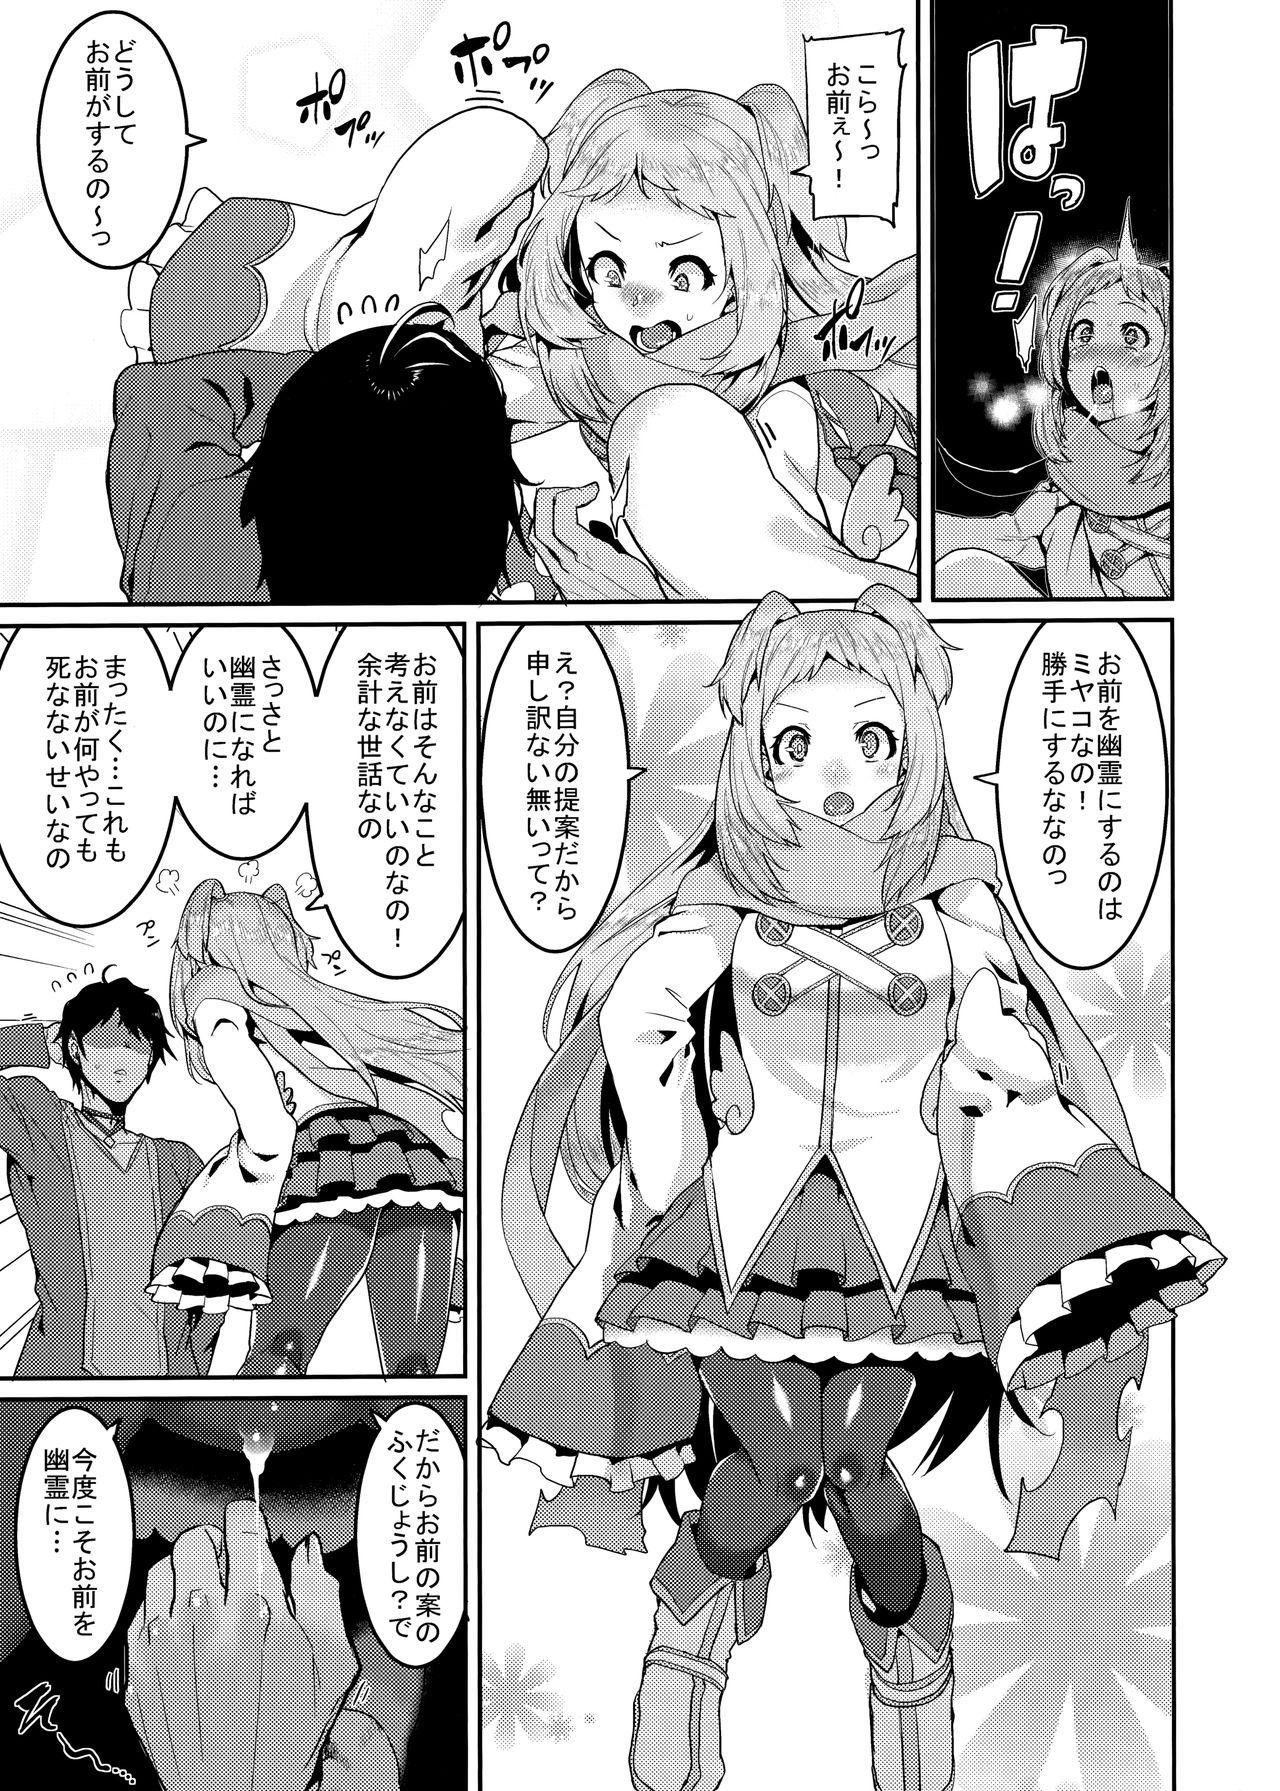 Amatuer Pudding Switch - Princess connect Orgasmus - Page 7